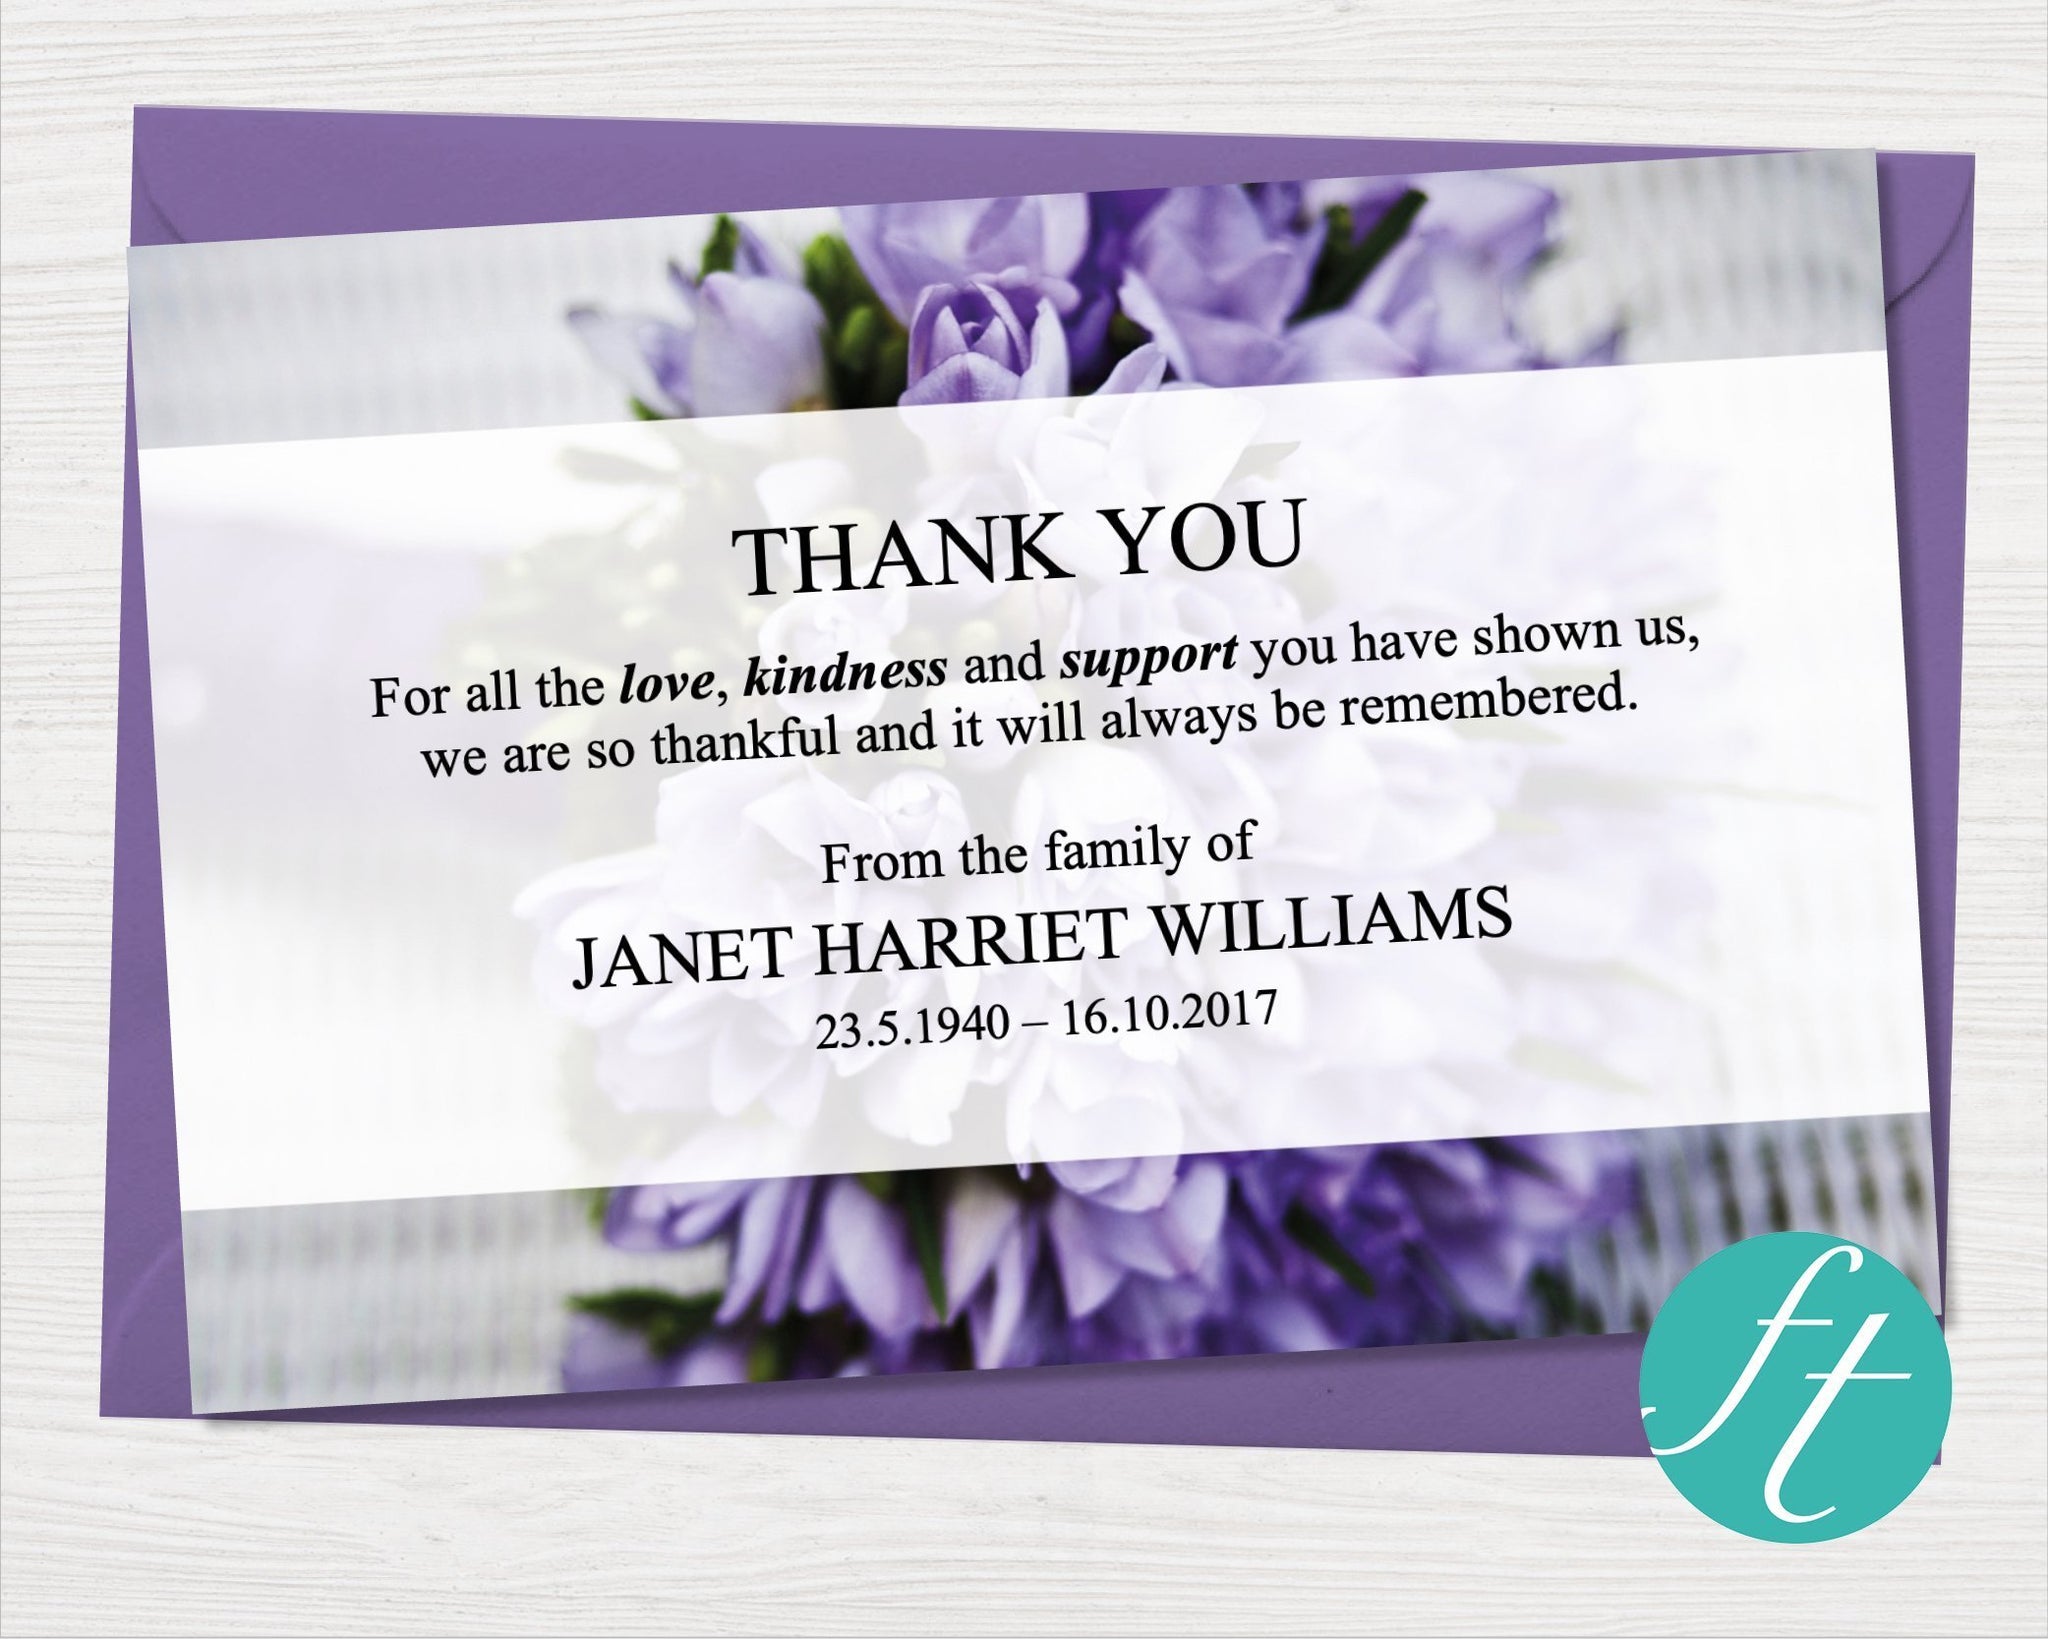 Thank You Card Flowers Funeral Delicate Flower Photo Funeral Thank